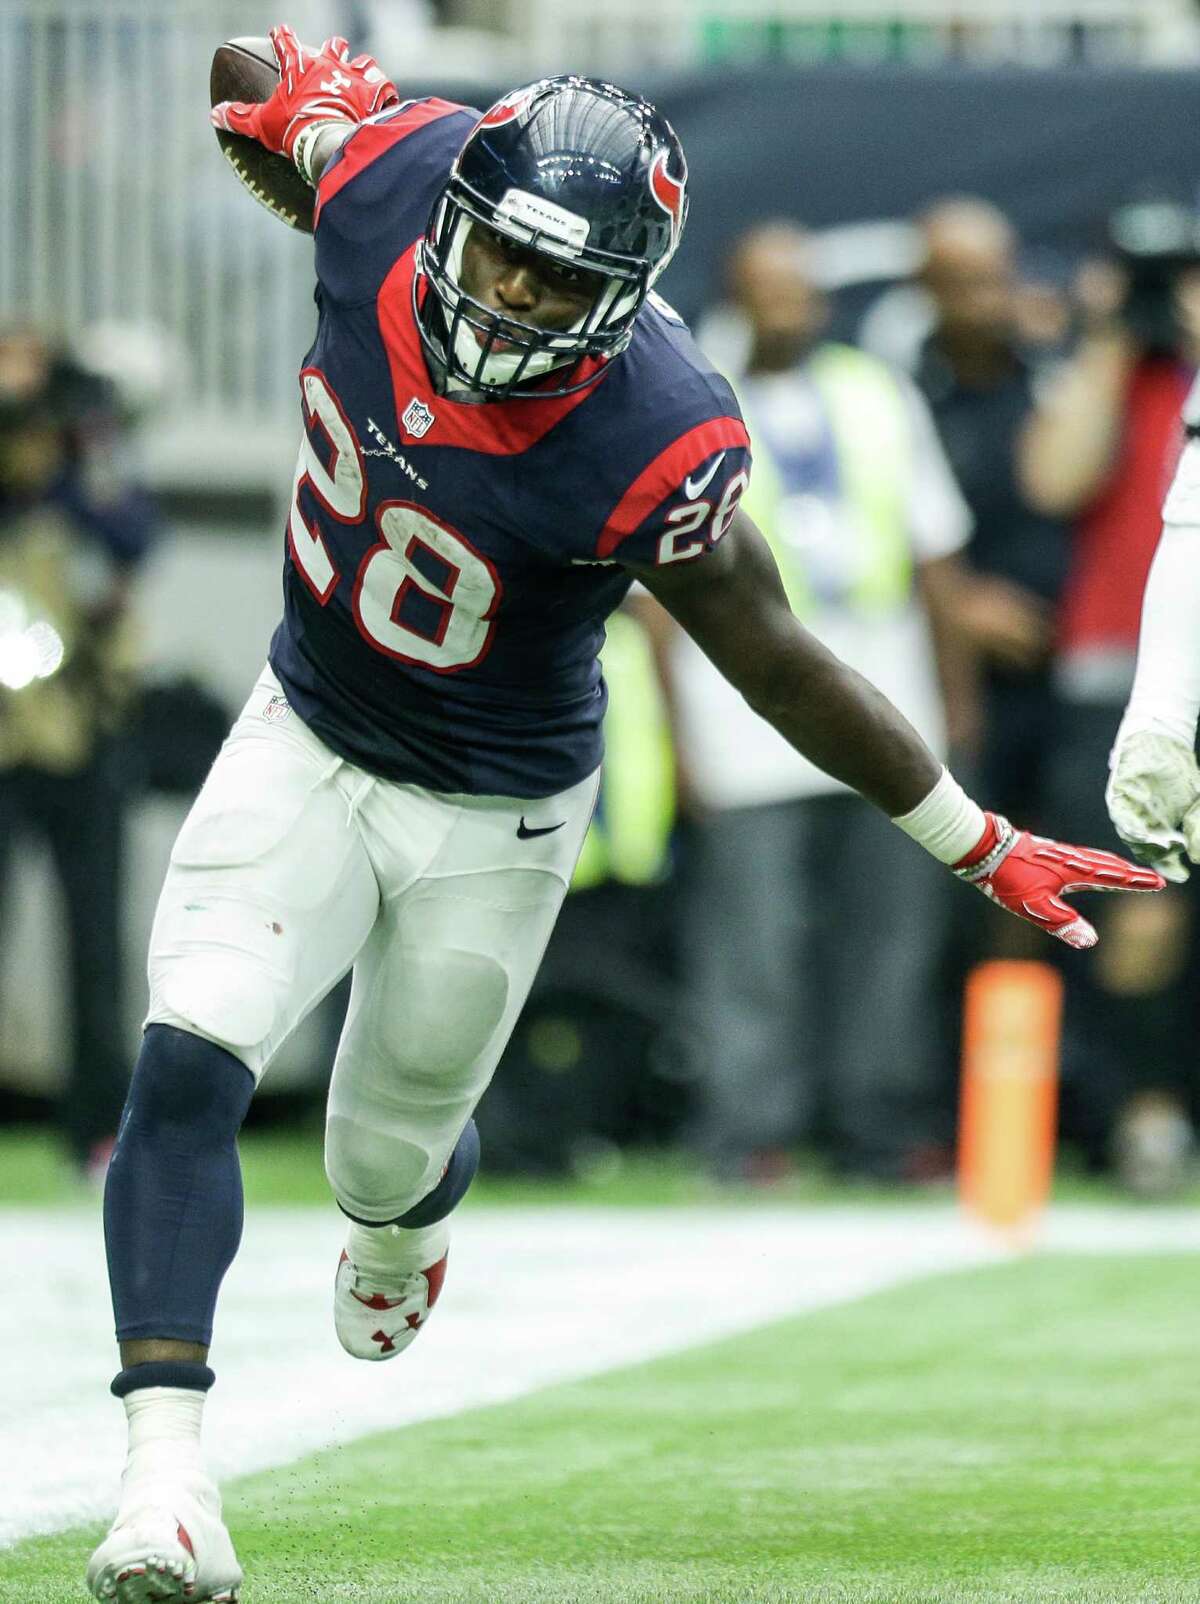 Houston Texans running back Alfred Blue (28) celebrates after making a 21-yard touchdown reception on a pass from Cecil Shorts during the third quarter against the New York Jets of an NFL football game at NRG Stadium on Sunday, Nov. 22, 2015, in Houston. ( Brett Coomer / Houston Chronicle )